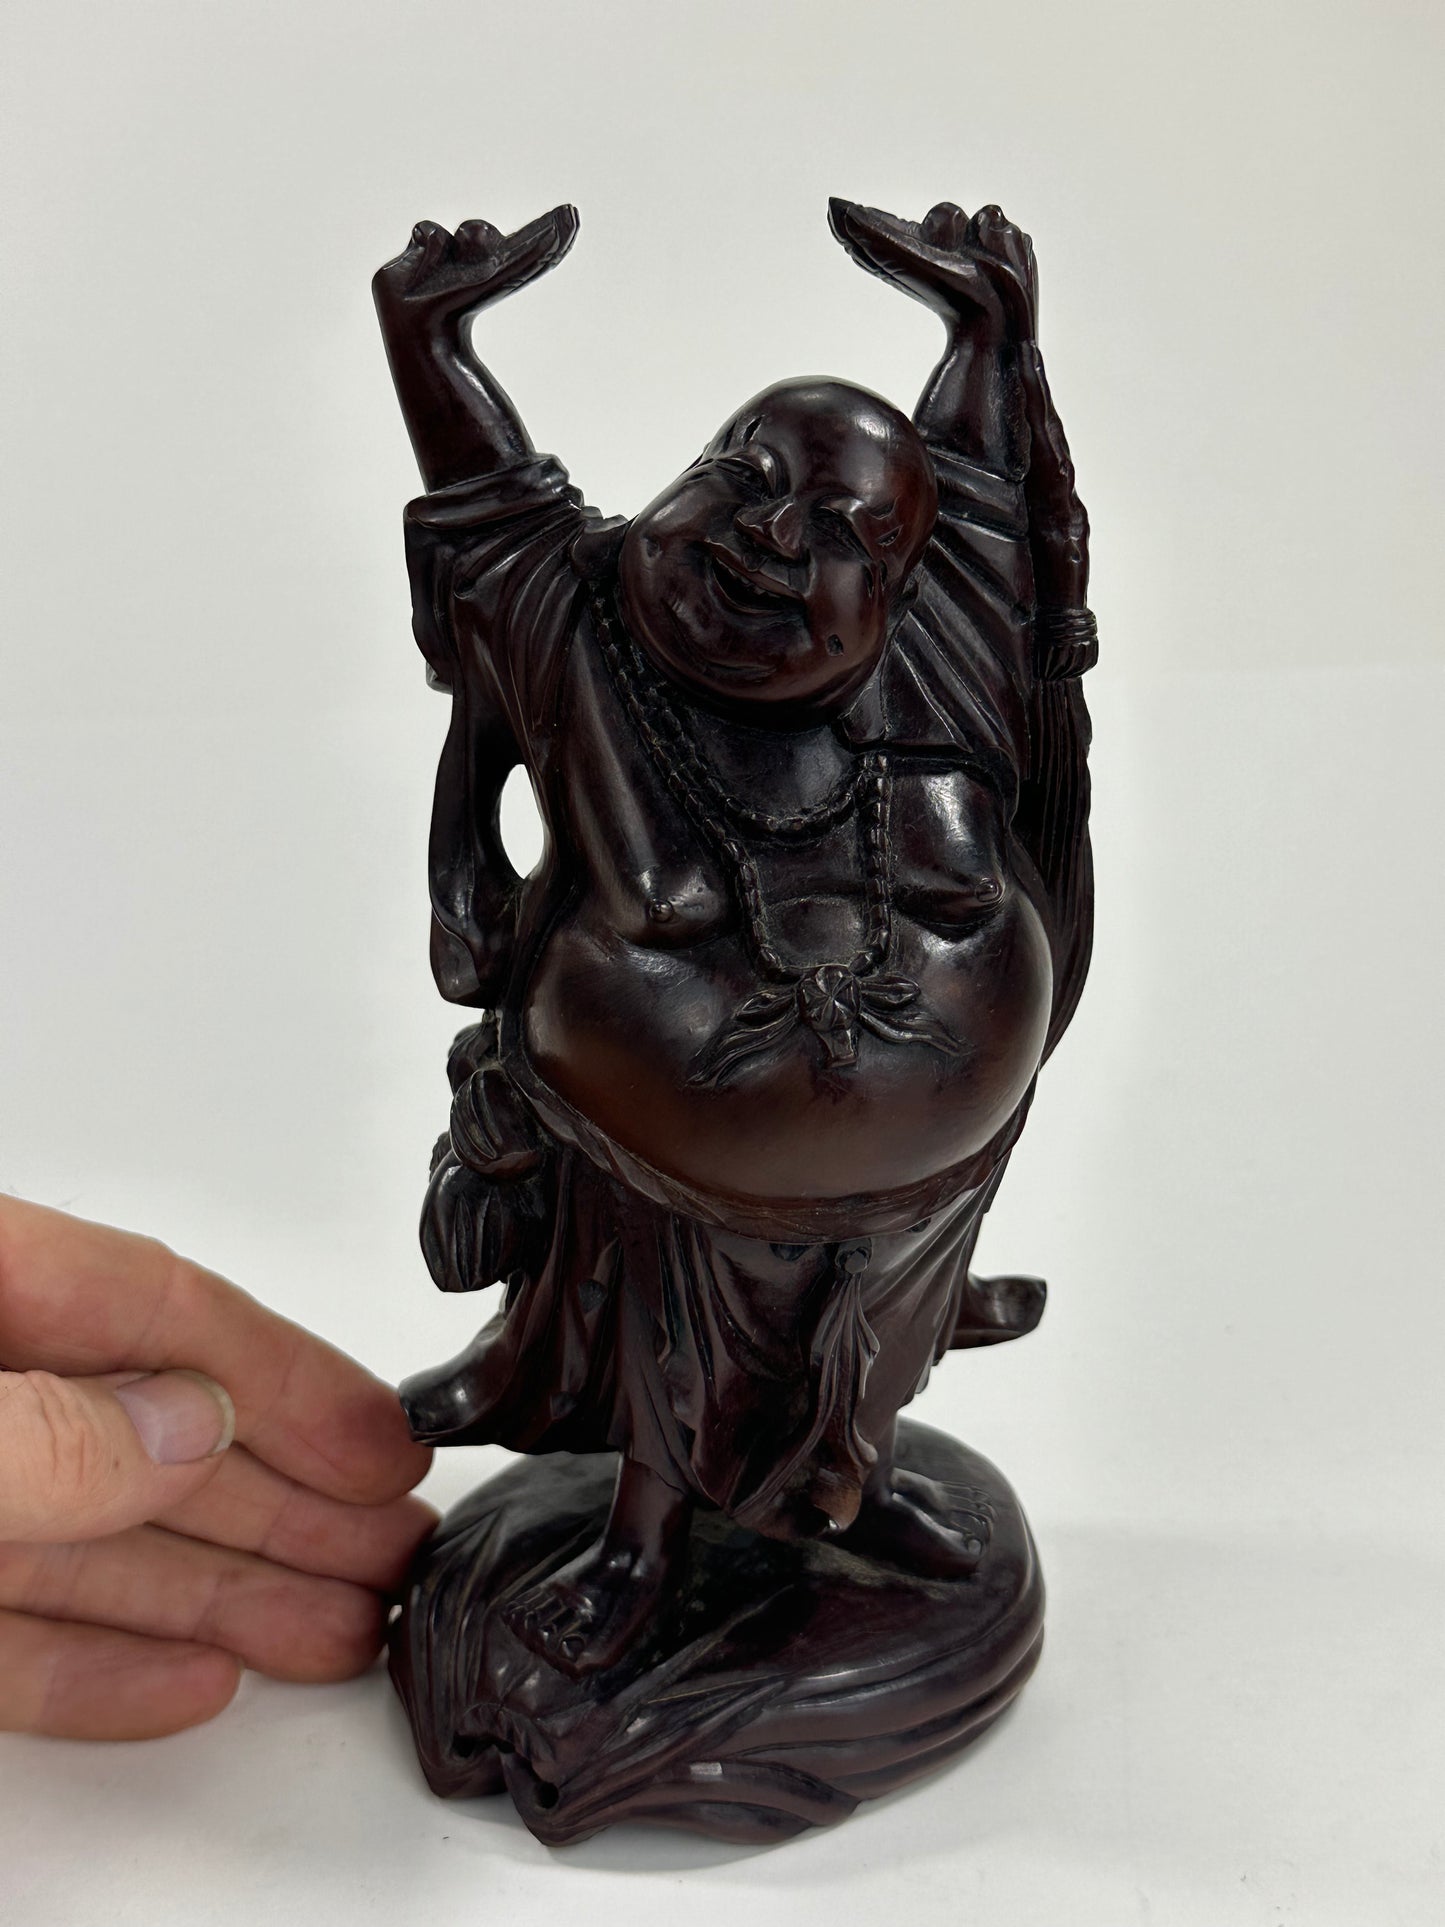 Antique Japanese Carved Wooden Statue of Hotei Lucky God 8”